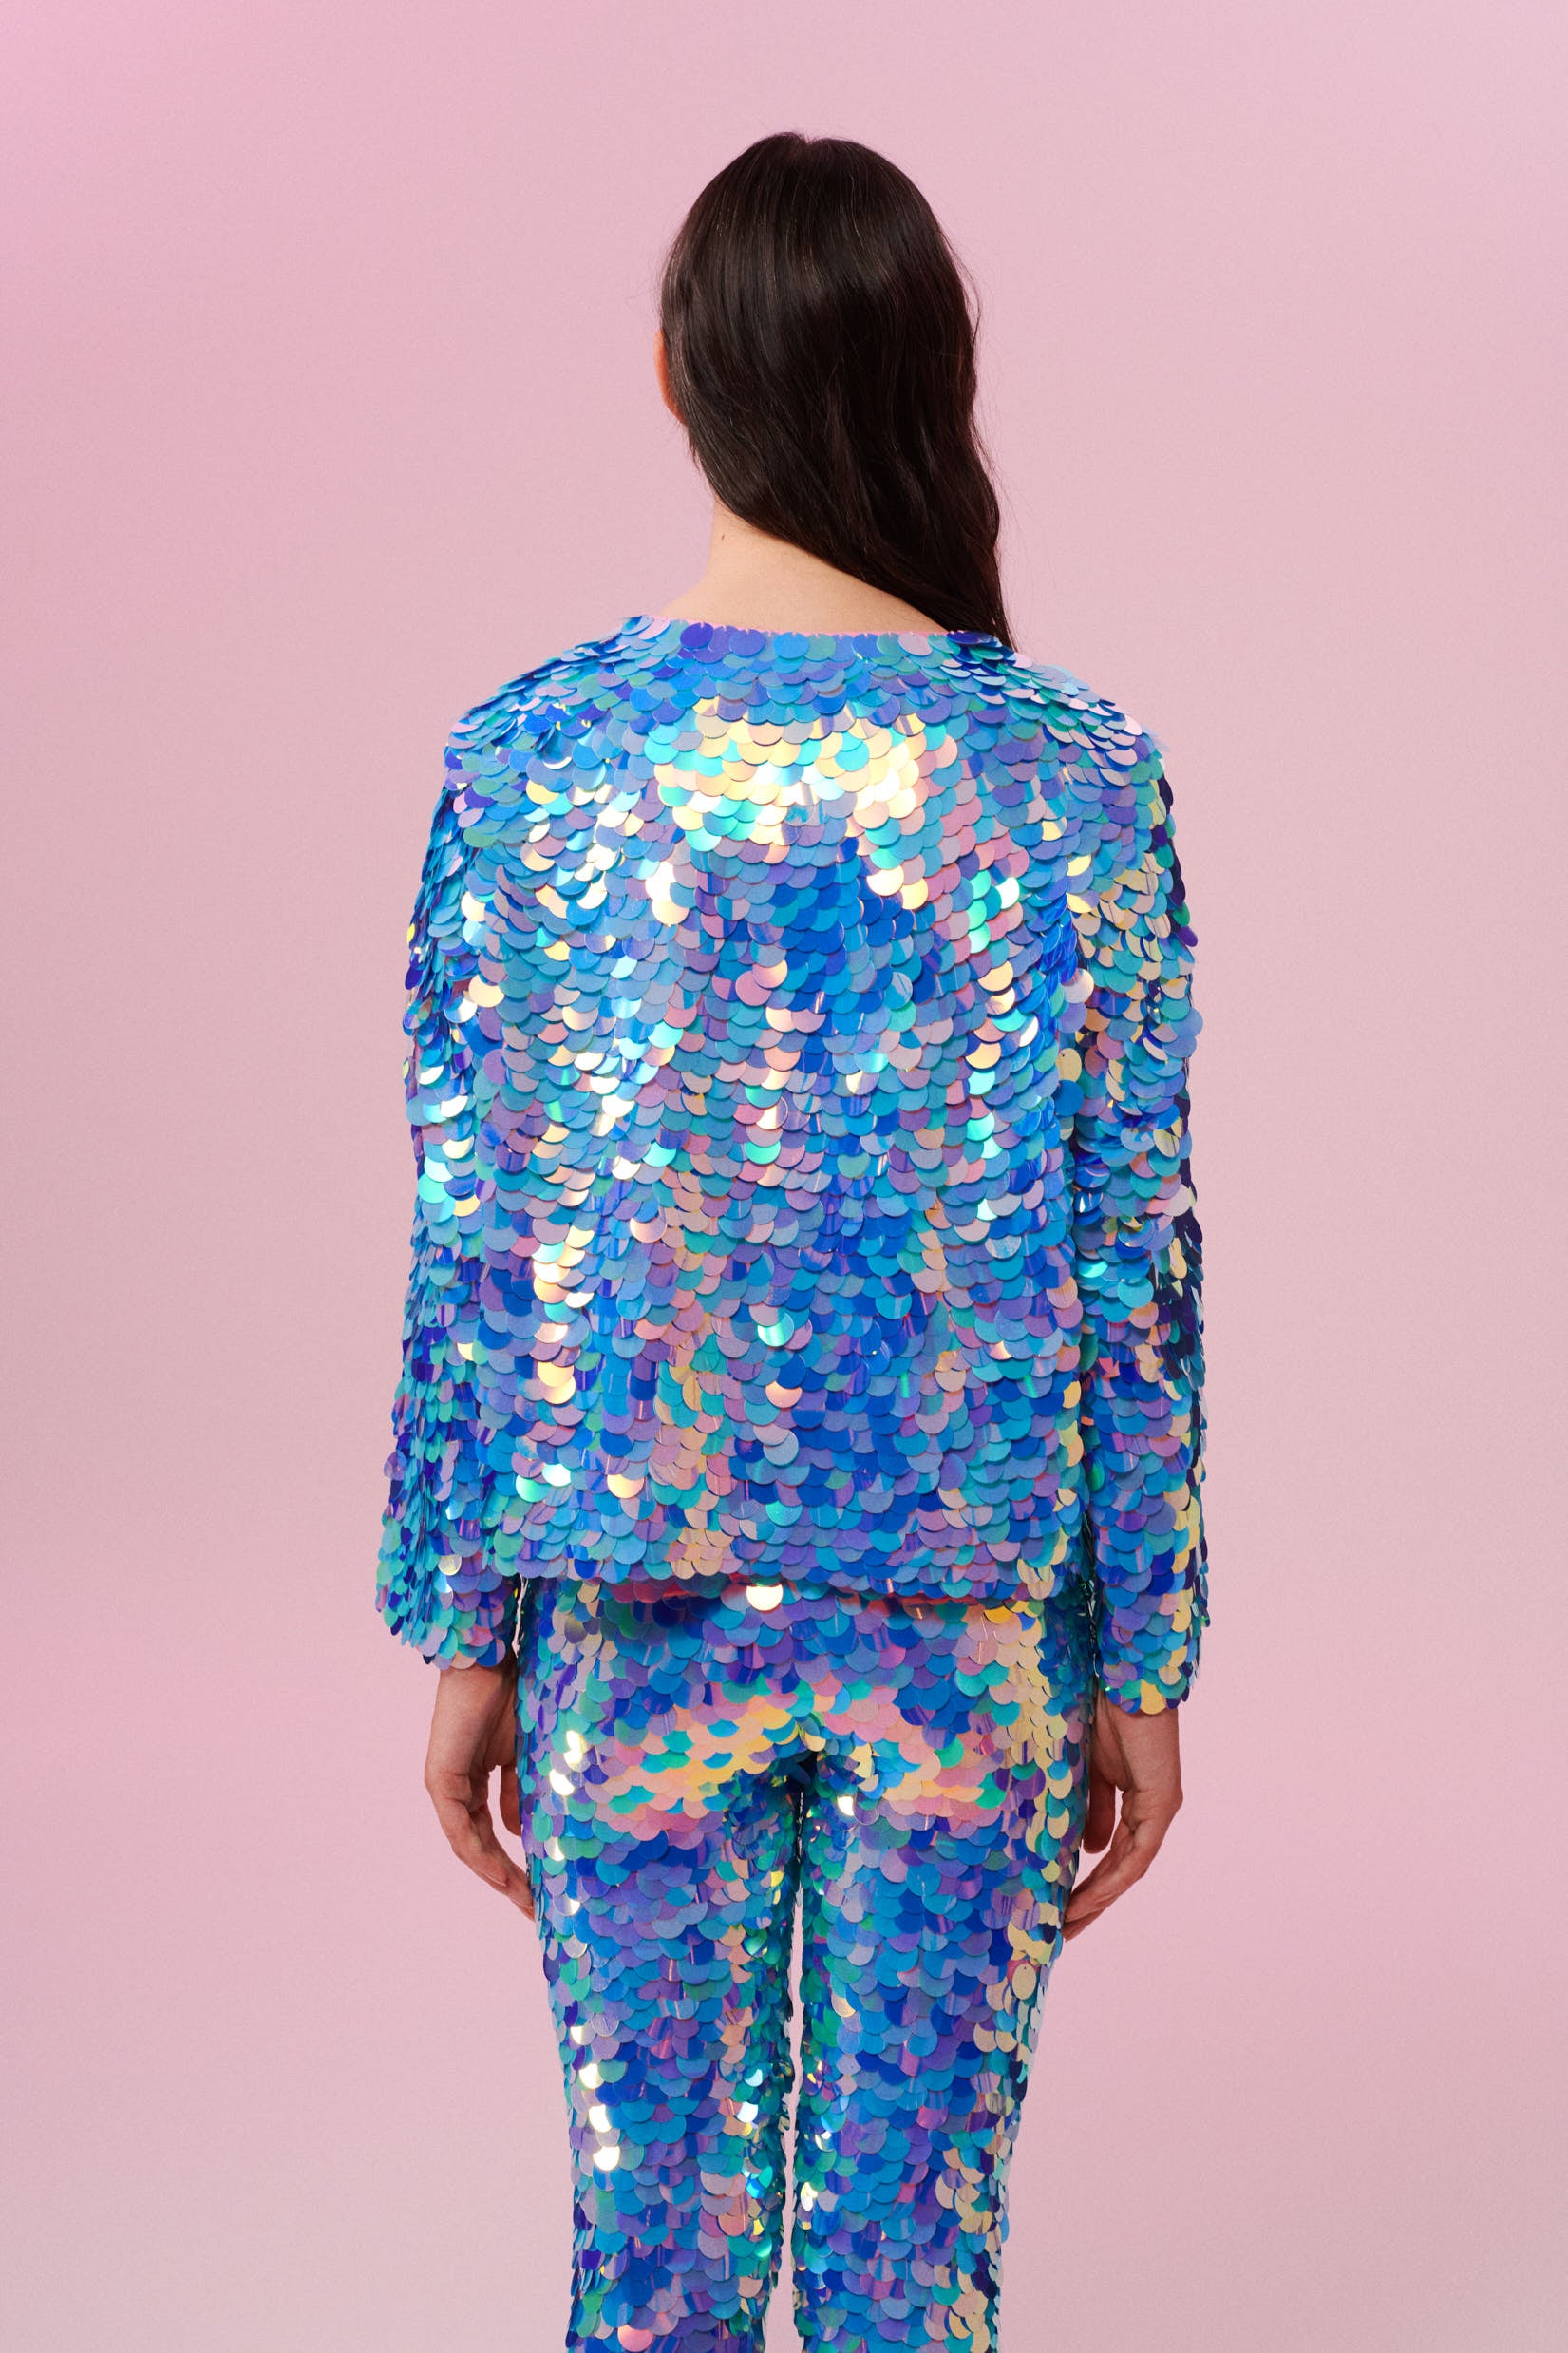 A woman with long brown hair swept over her shoulder standing with her back to the camera in a brightly lit indoor room with pink walls wearing a Rosa Bloom blue and pink sequin jacket and Rosa Bloom blue and pink sequin leggings